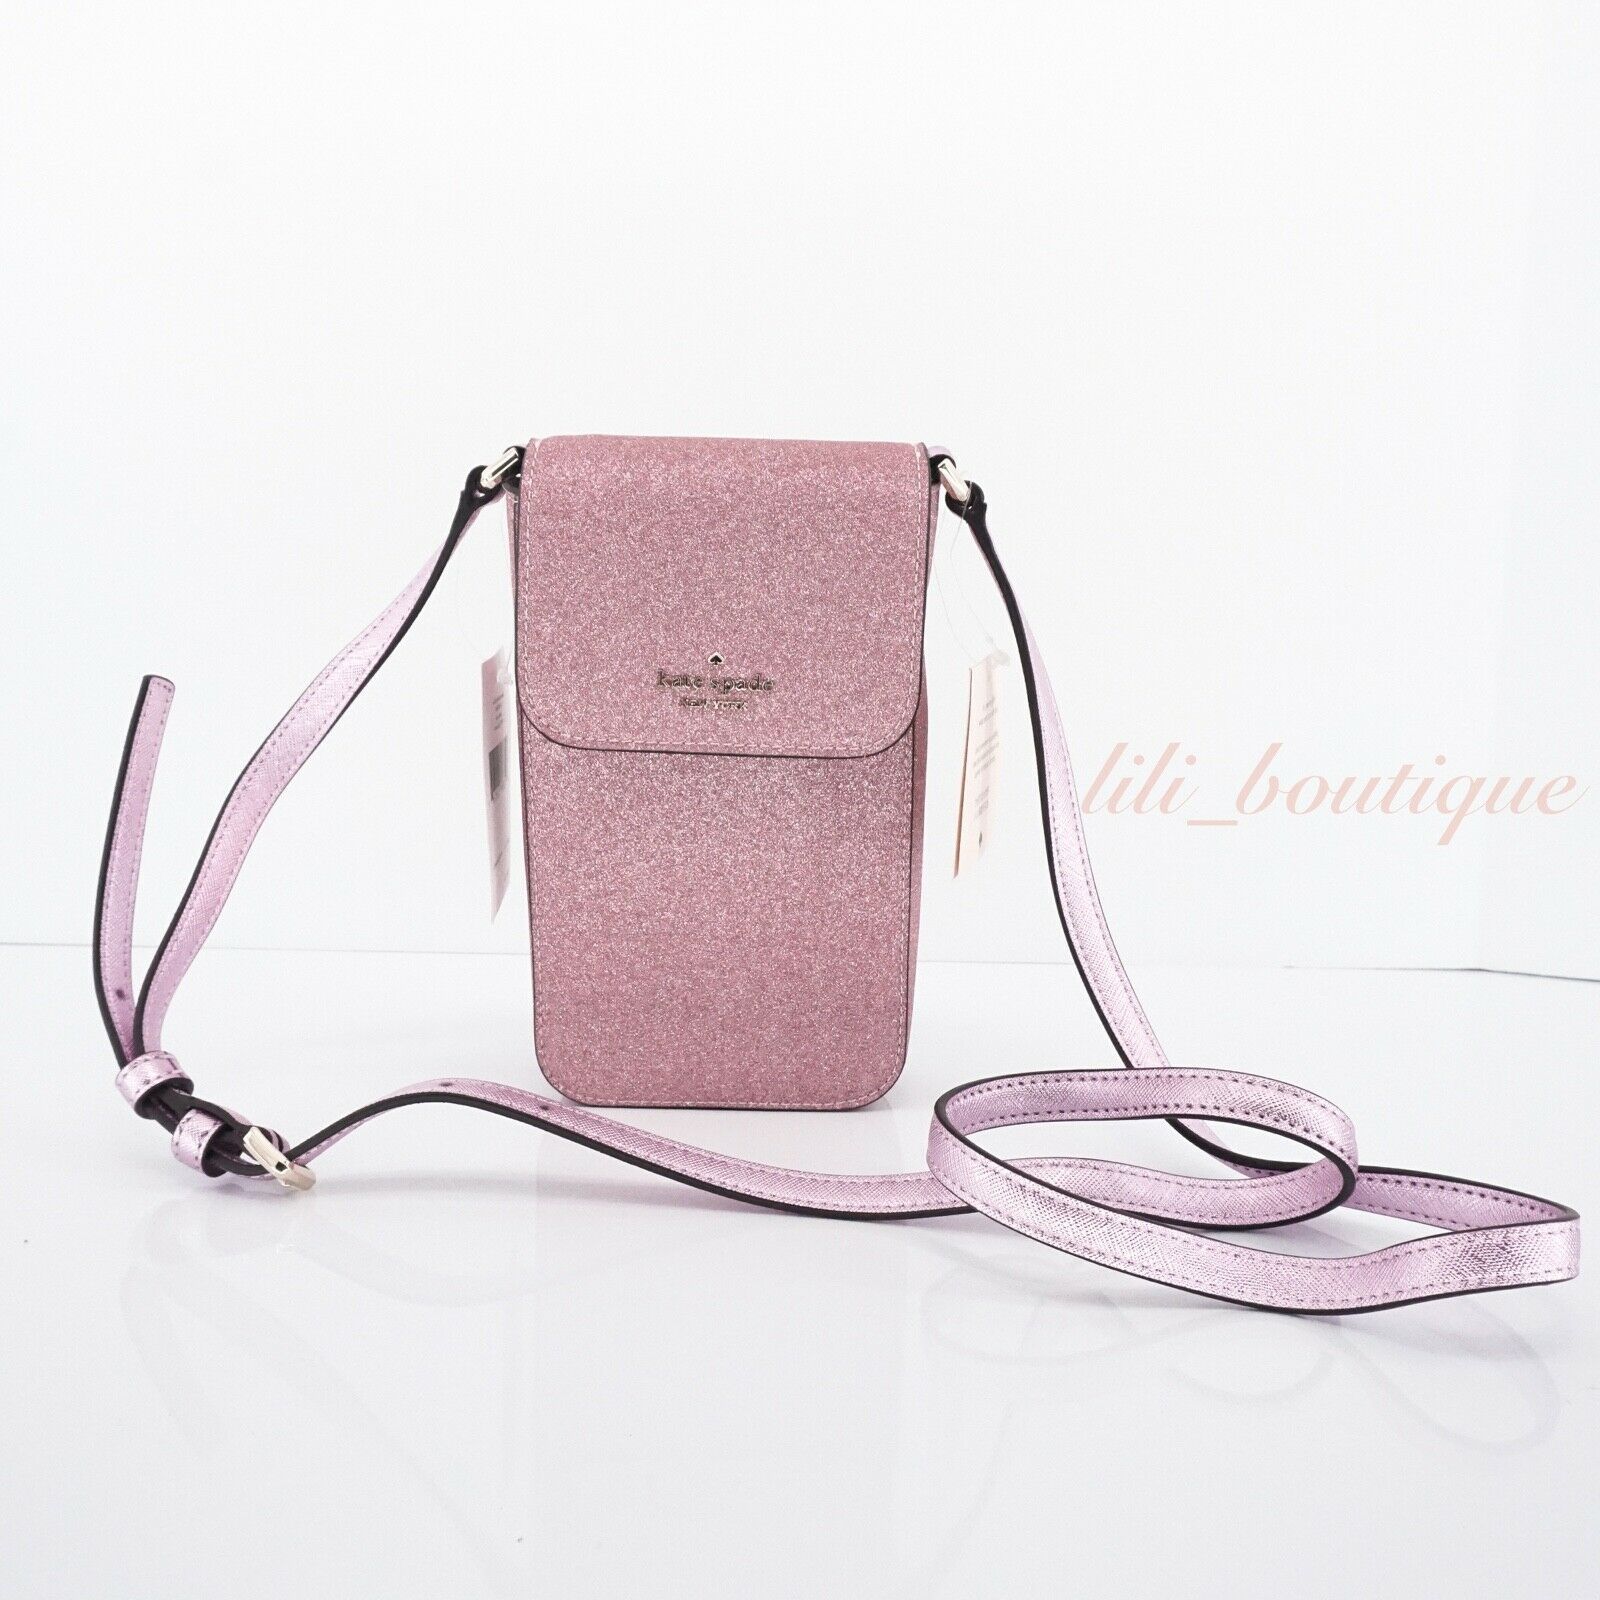 Primary image for NWT Kate Spade WIR00014 North South Flap Phone Crossbody Lola Glitter Rose Pink